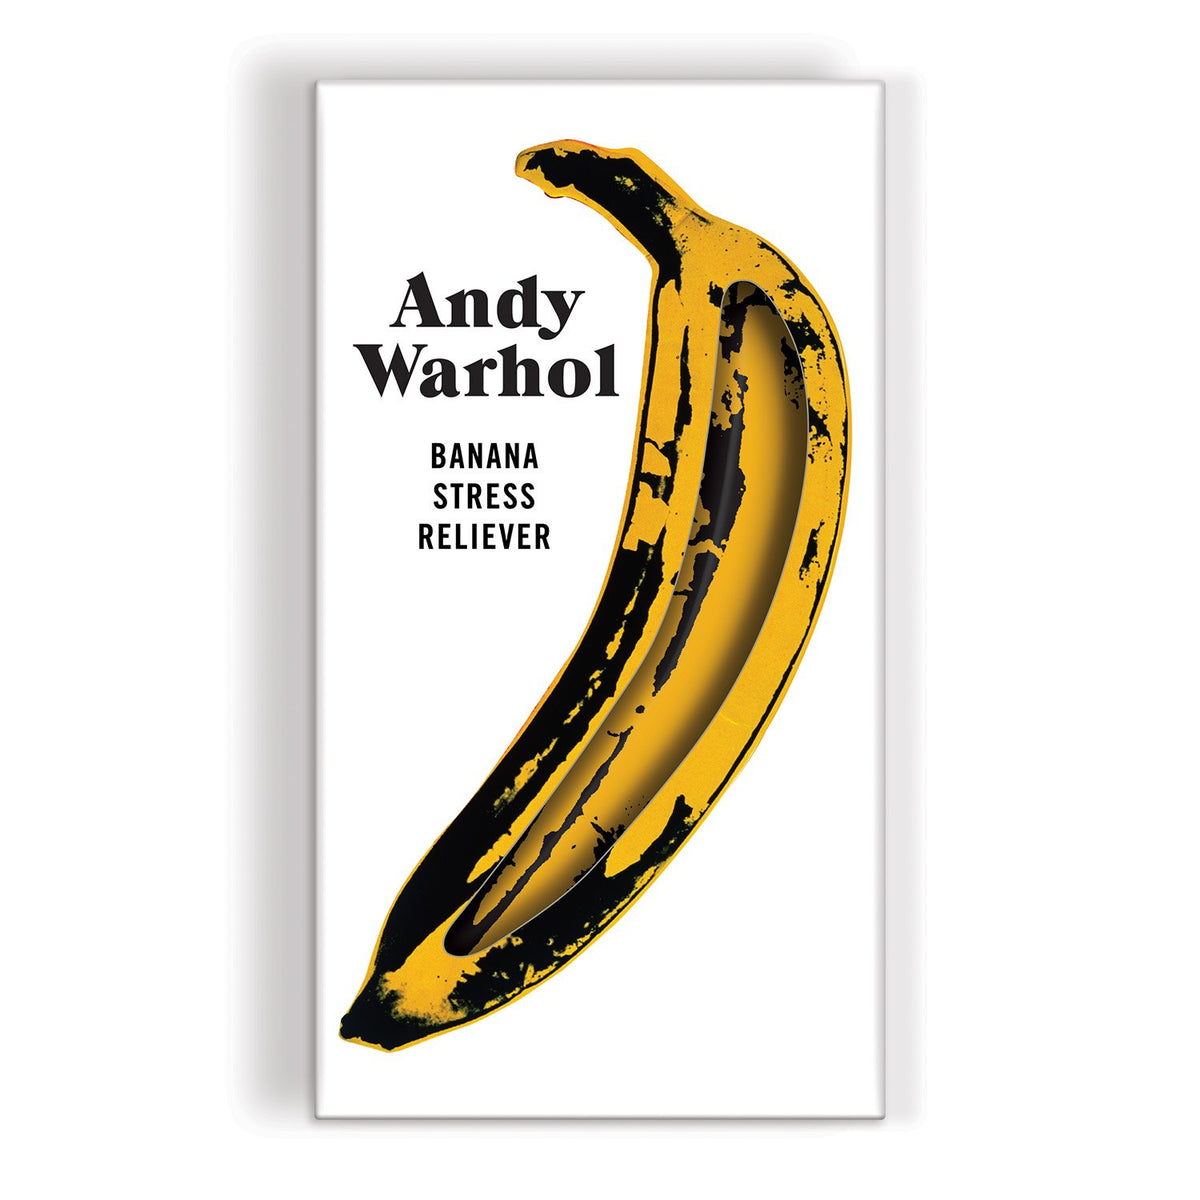 Warhol Banana Stress Reliever Stress Relievers Andy Warhol 